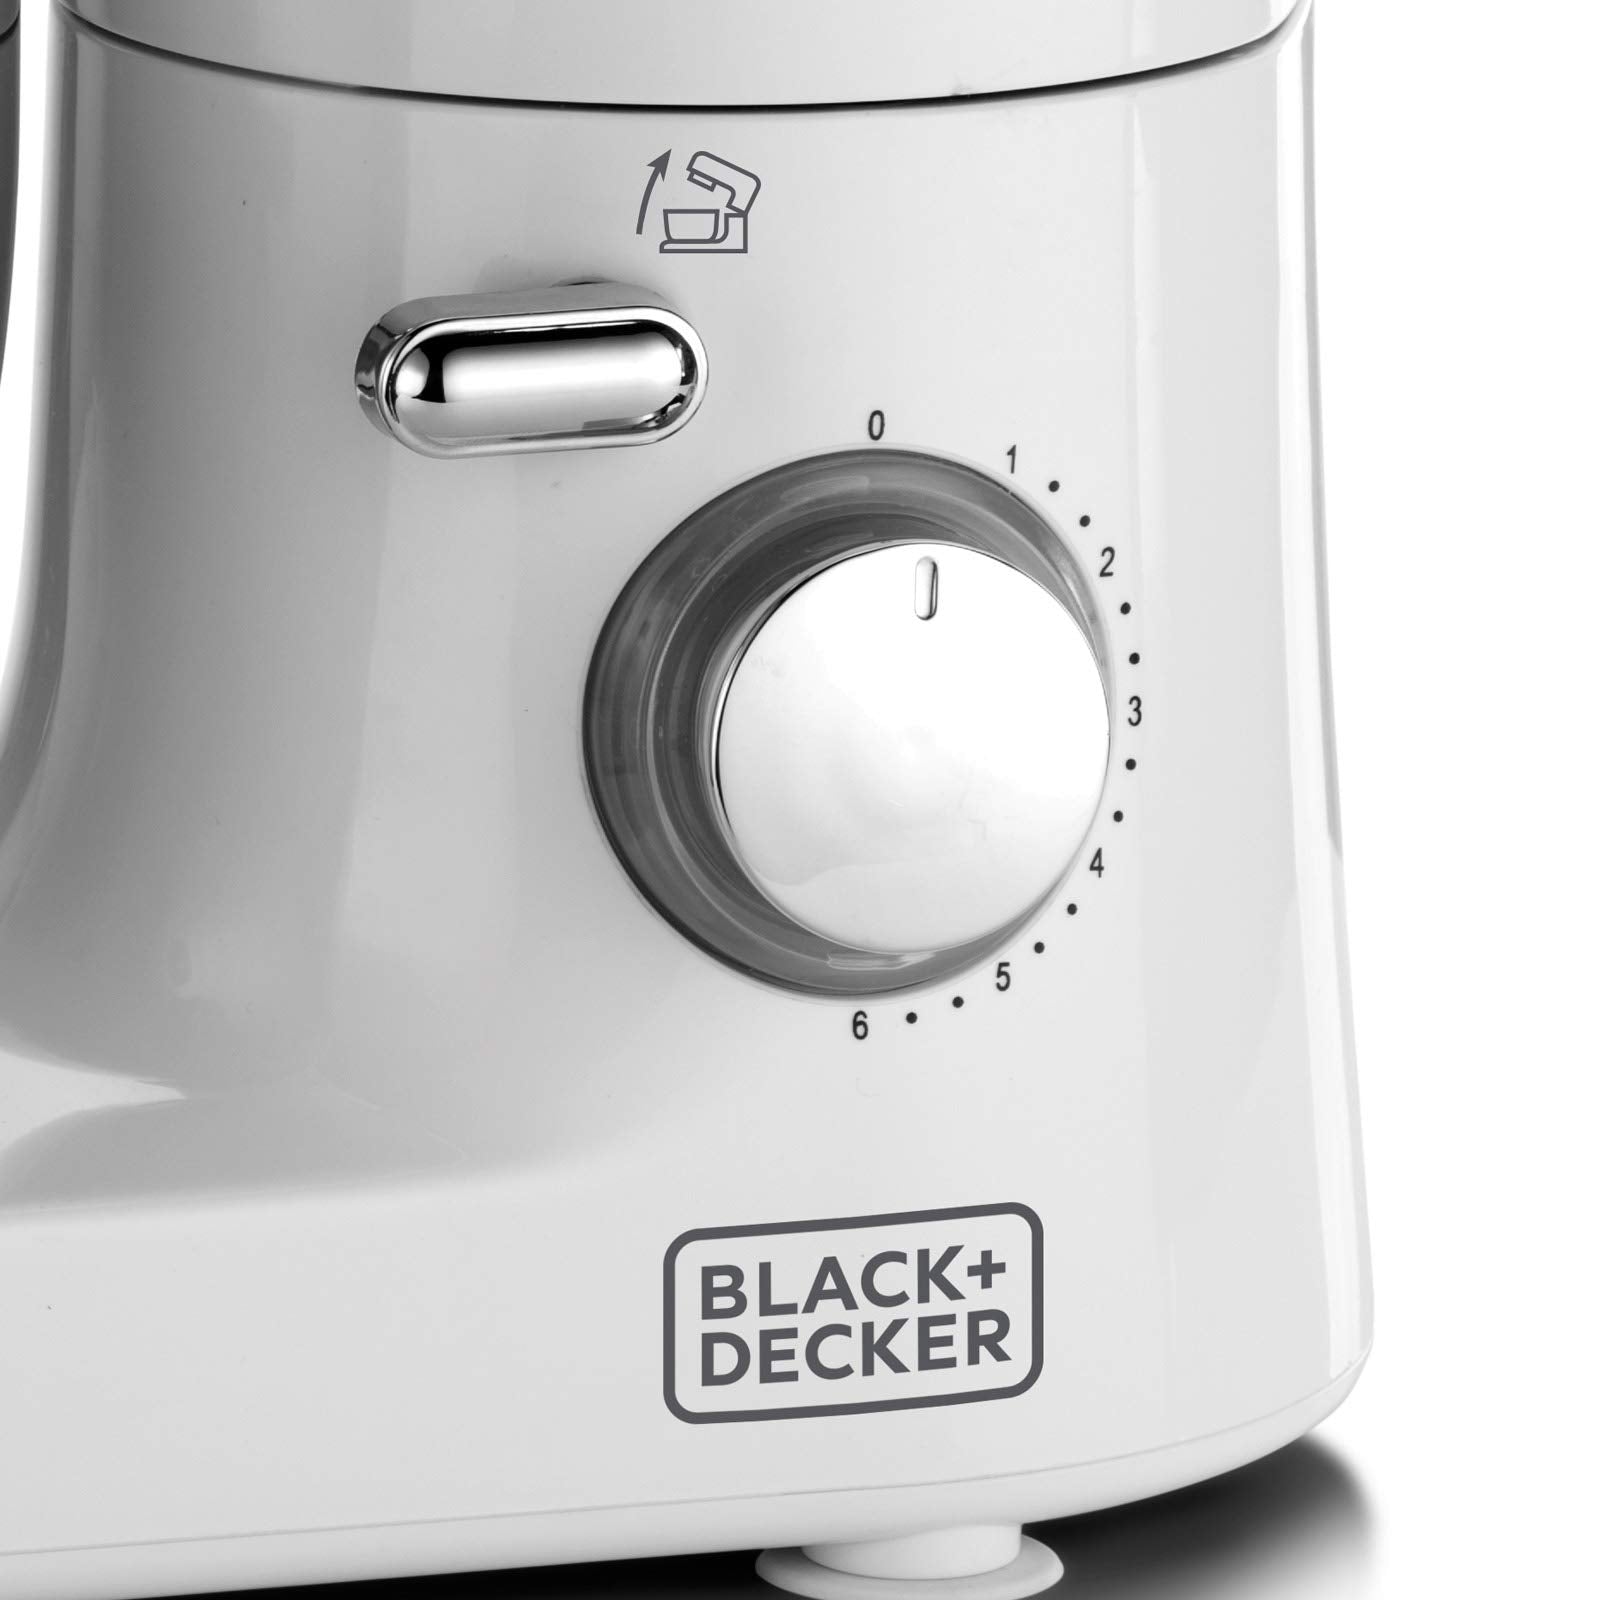 BLACK+DECKER Kitchen Stand Mixer Machine, 1000W Power, 4L Large Capacity, Stainless Steel Bowl, 6 Speed Settings for Perfect Baking Results, Easy Mixing & Kneading, , SM1000-B5